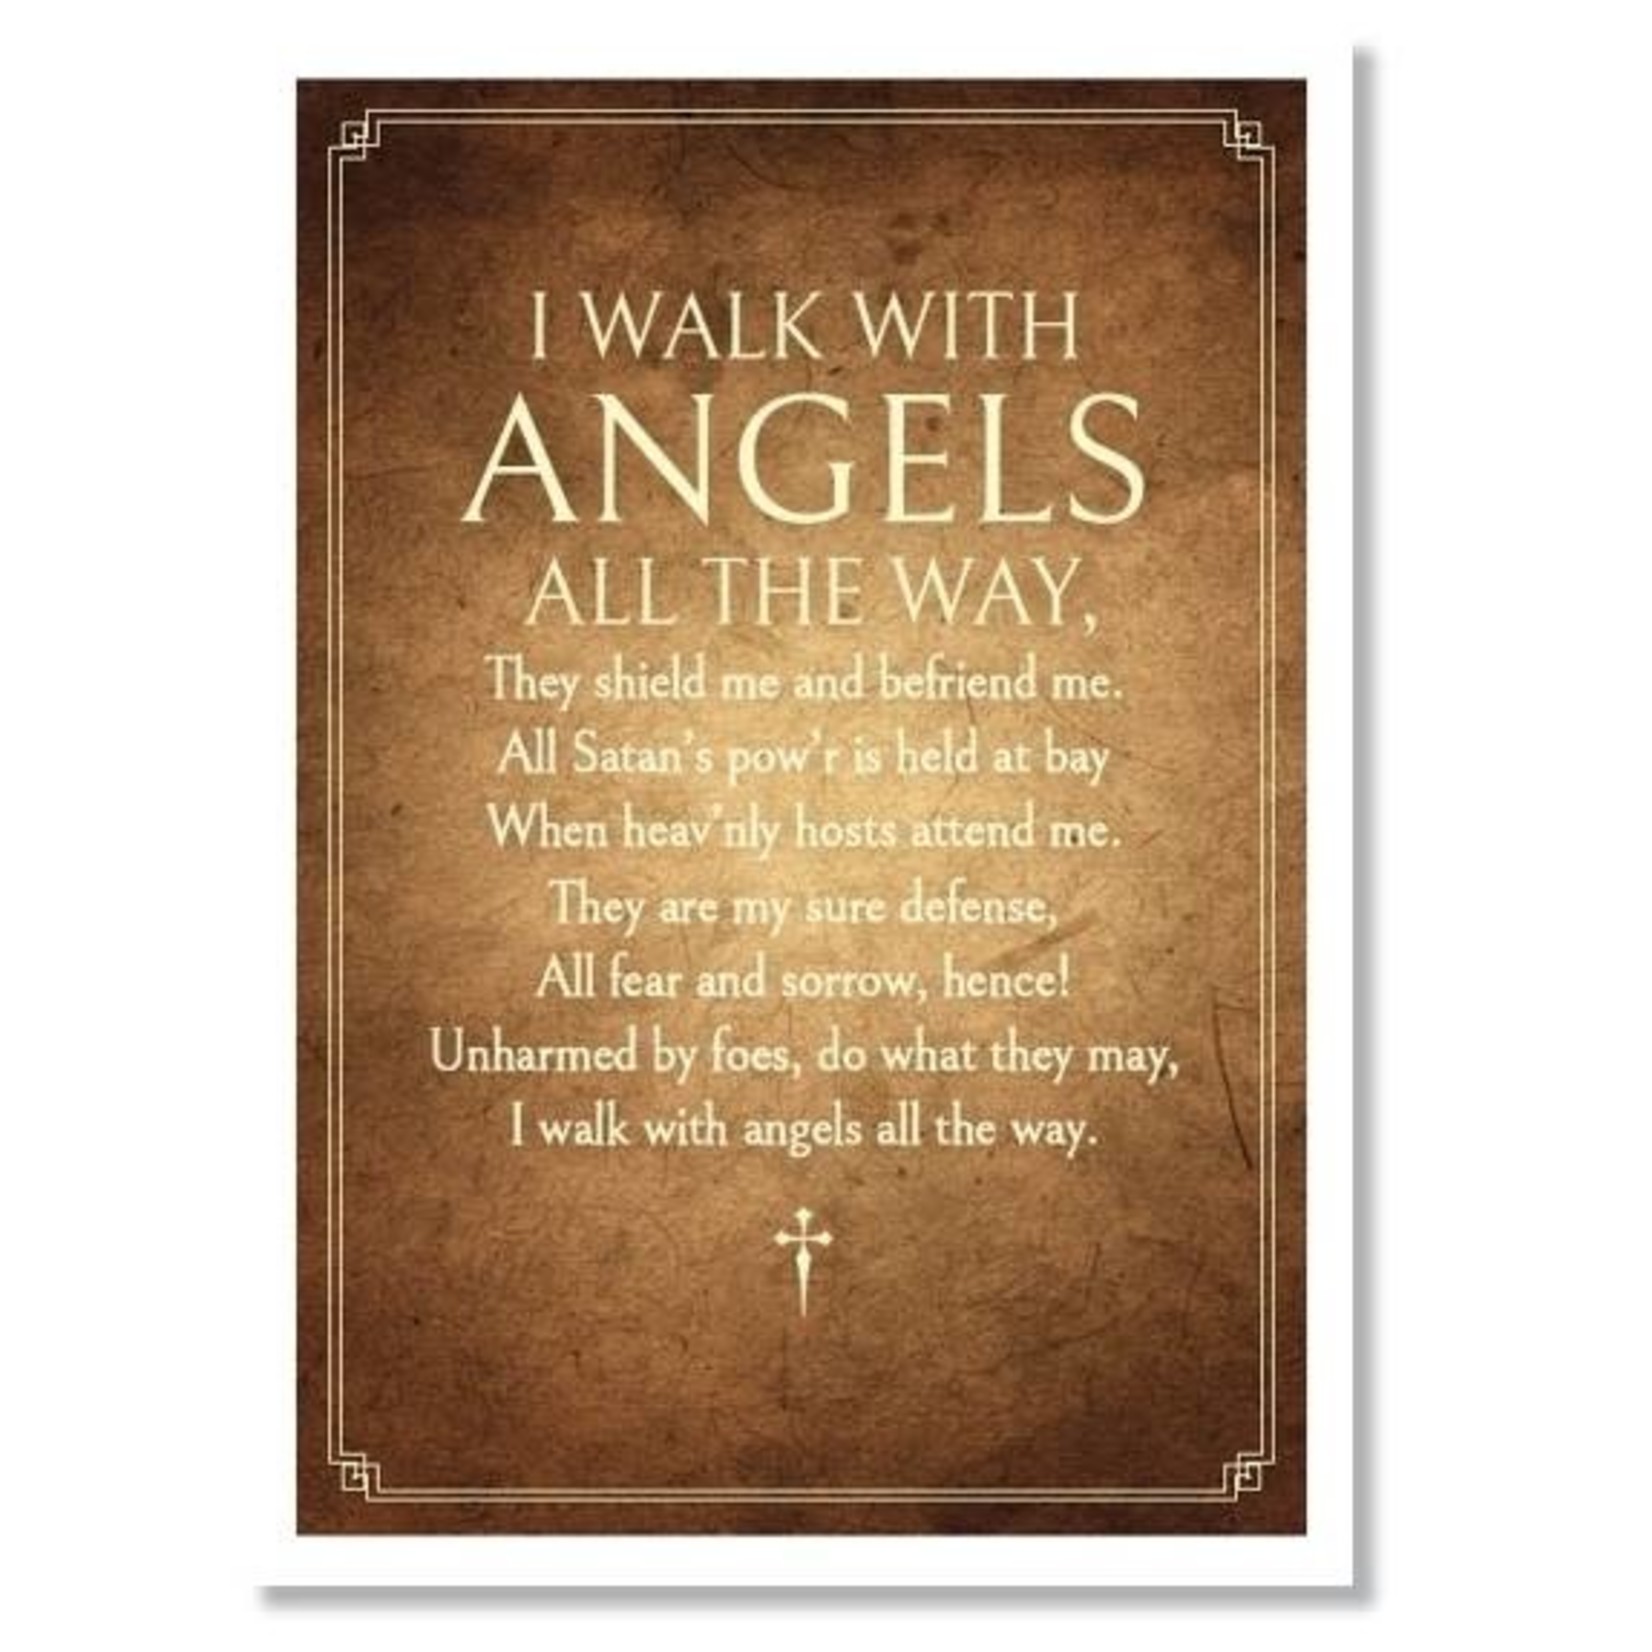 Hymns In My Heart - 5x7" Greeting Card - Graduation - I Walk With Angels